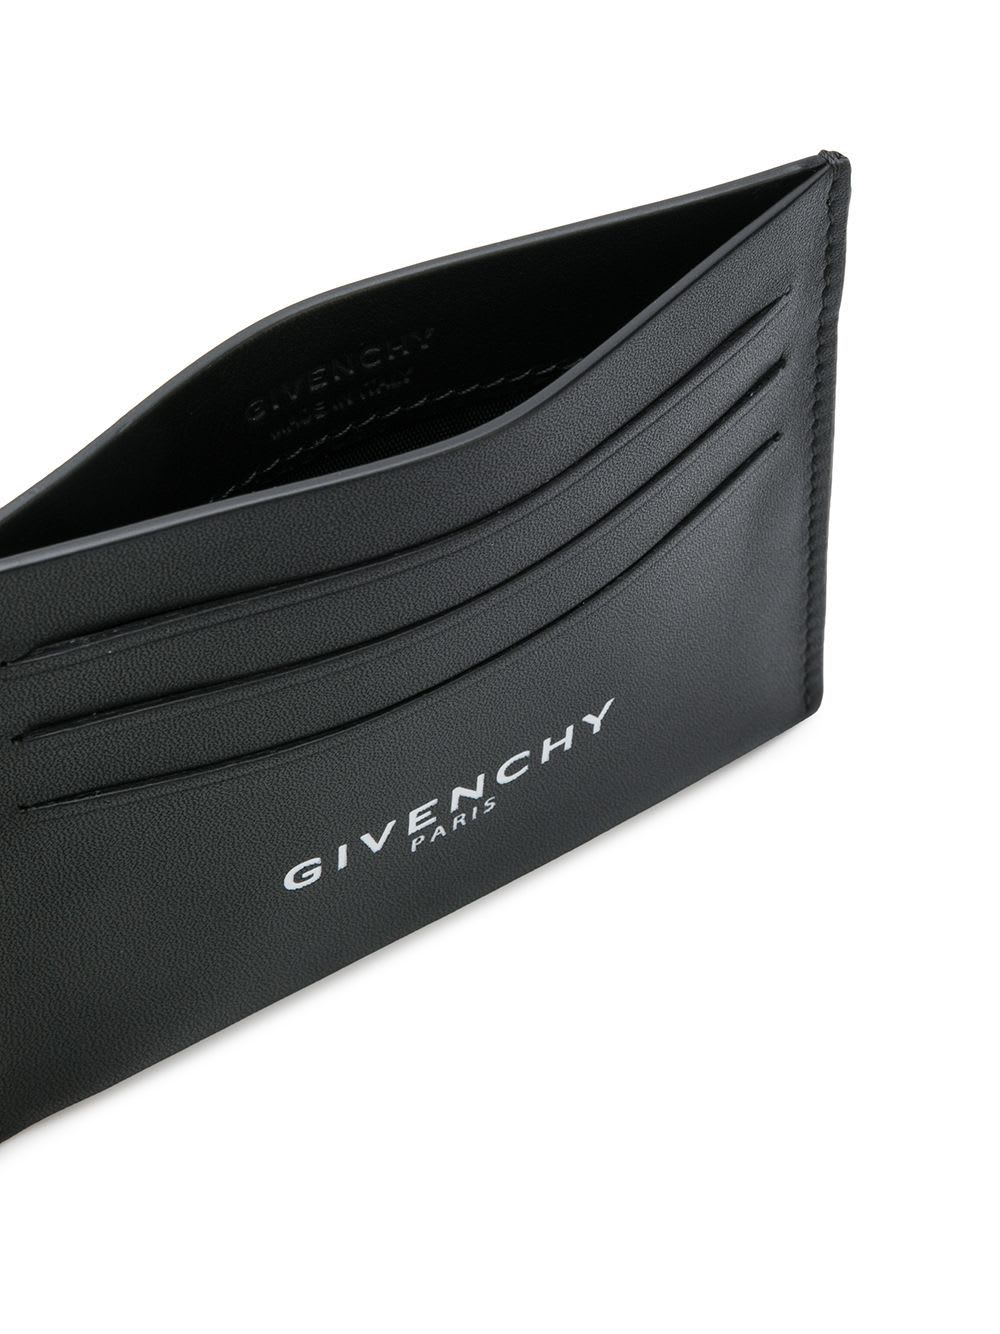 Man Givenchy Paris Card Holder In Black Leather | italist, ALWAYS LIKE A  SALE